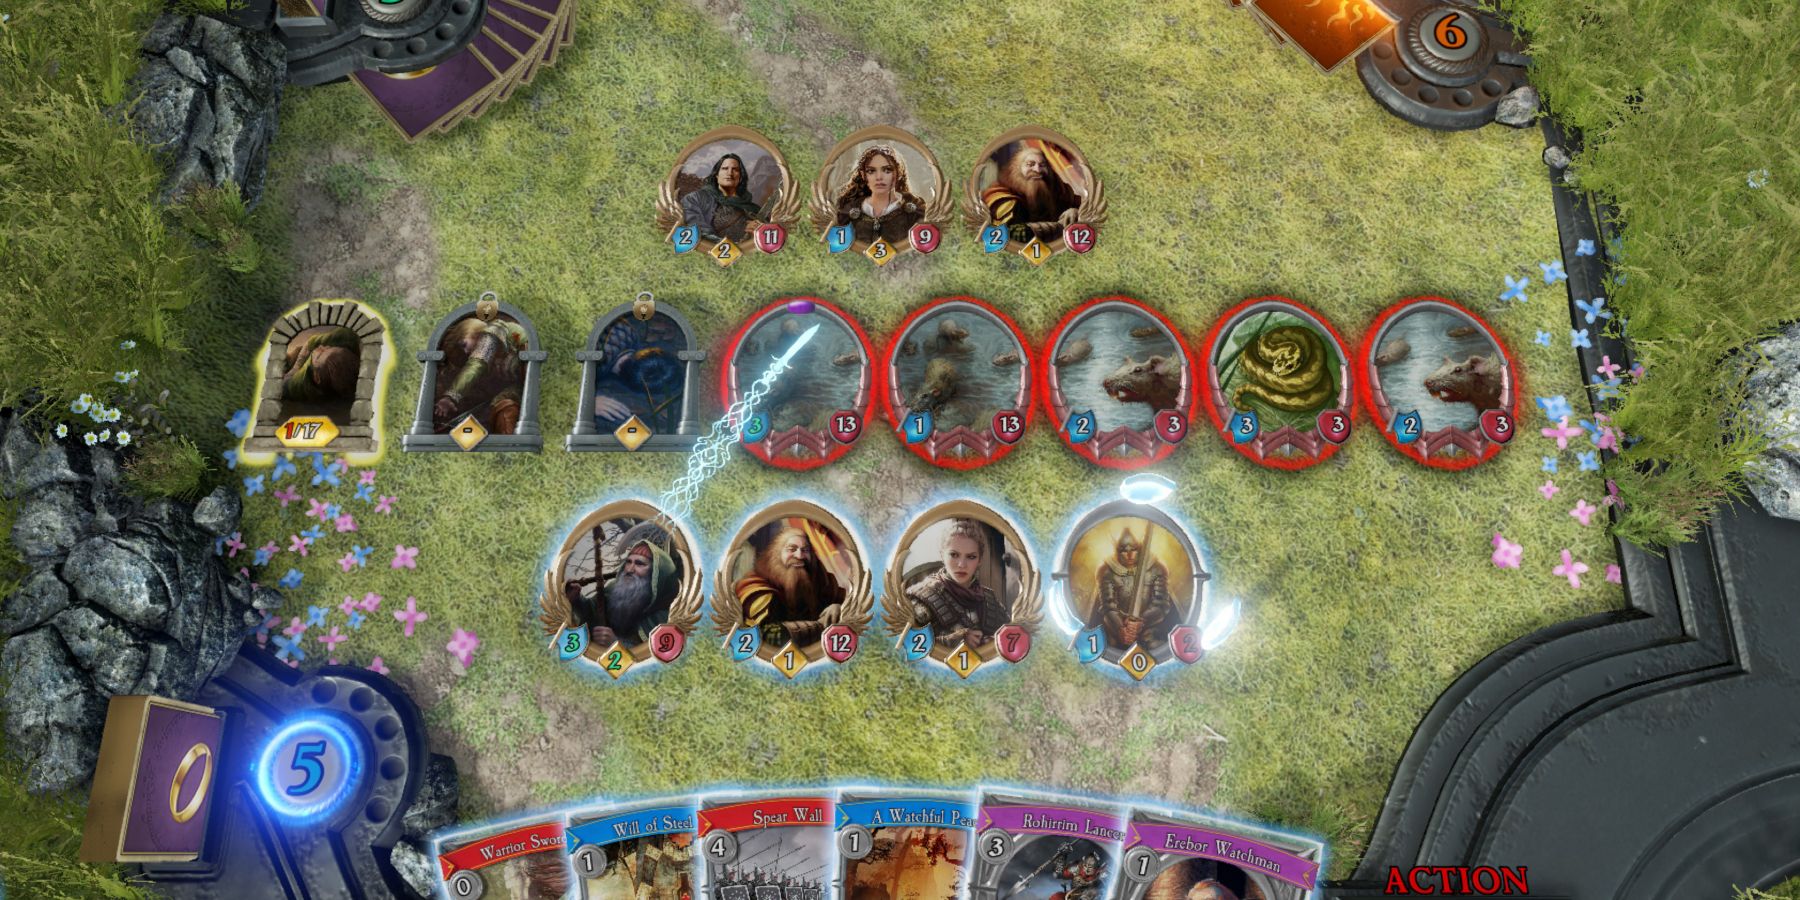 Many cards on the playing field in The Lord Of The Rings Adventure Card Game